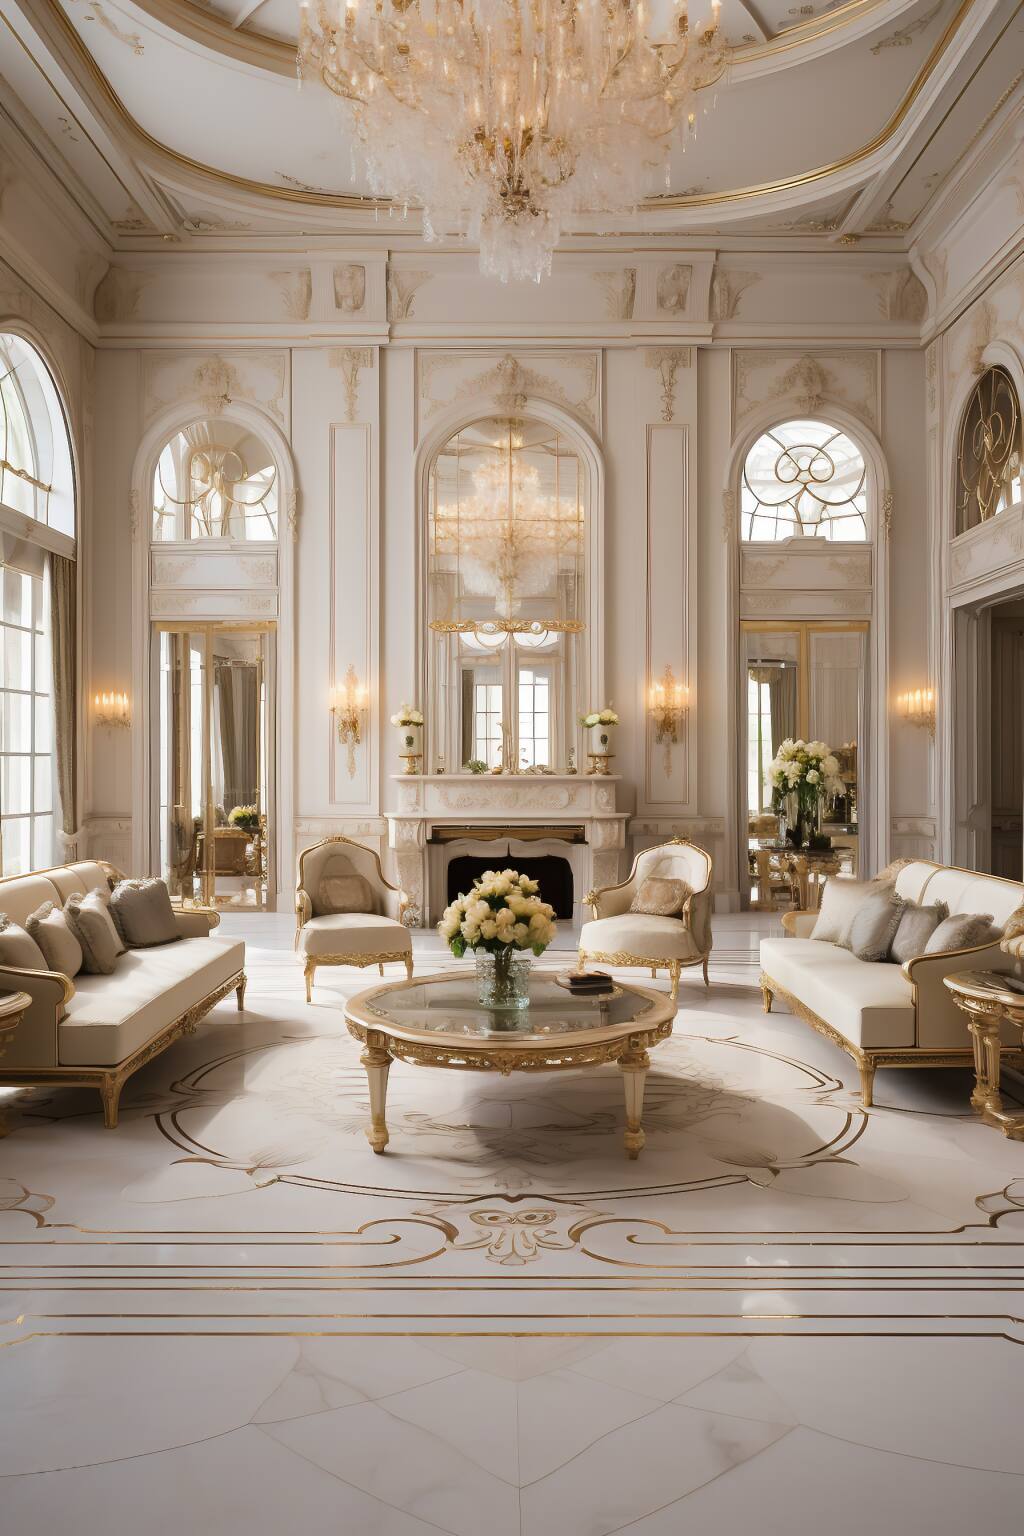 An Ivory And Gold Luxury Living Room With Leather Sofas, Gold-Detailed Armchairs, And White Marble Tables Under The Glow Of A Crystal Chandelier, Set Against A Backdrop Of Gleaming Marble Floors.